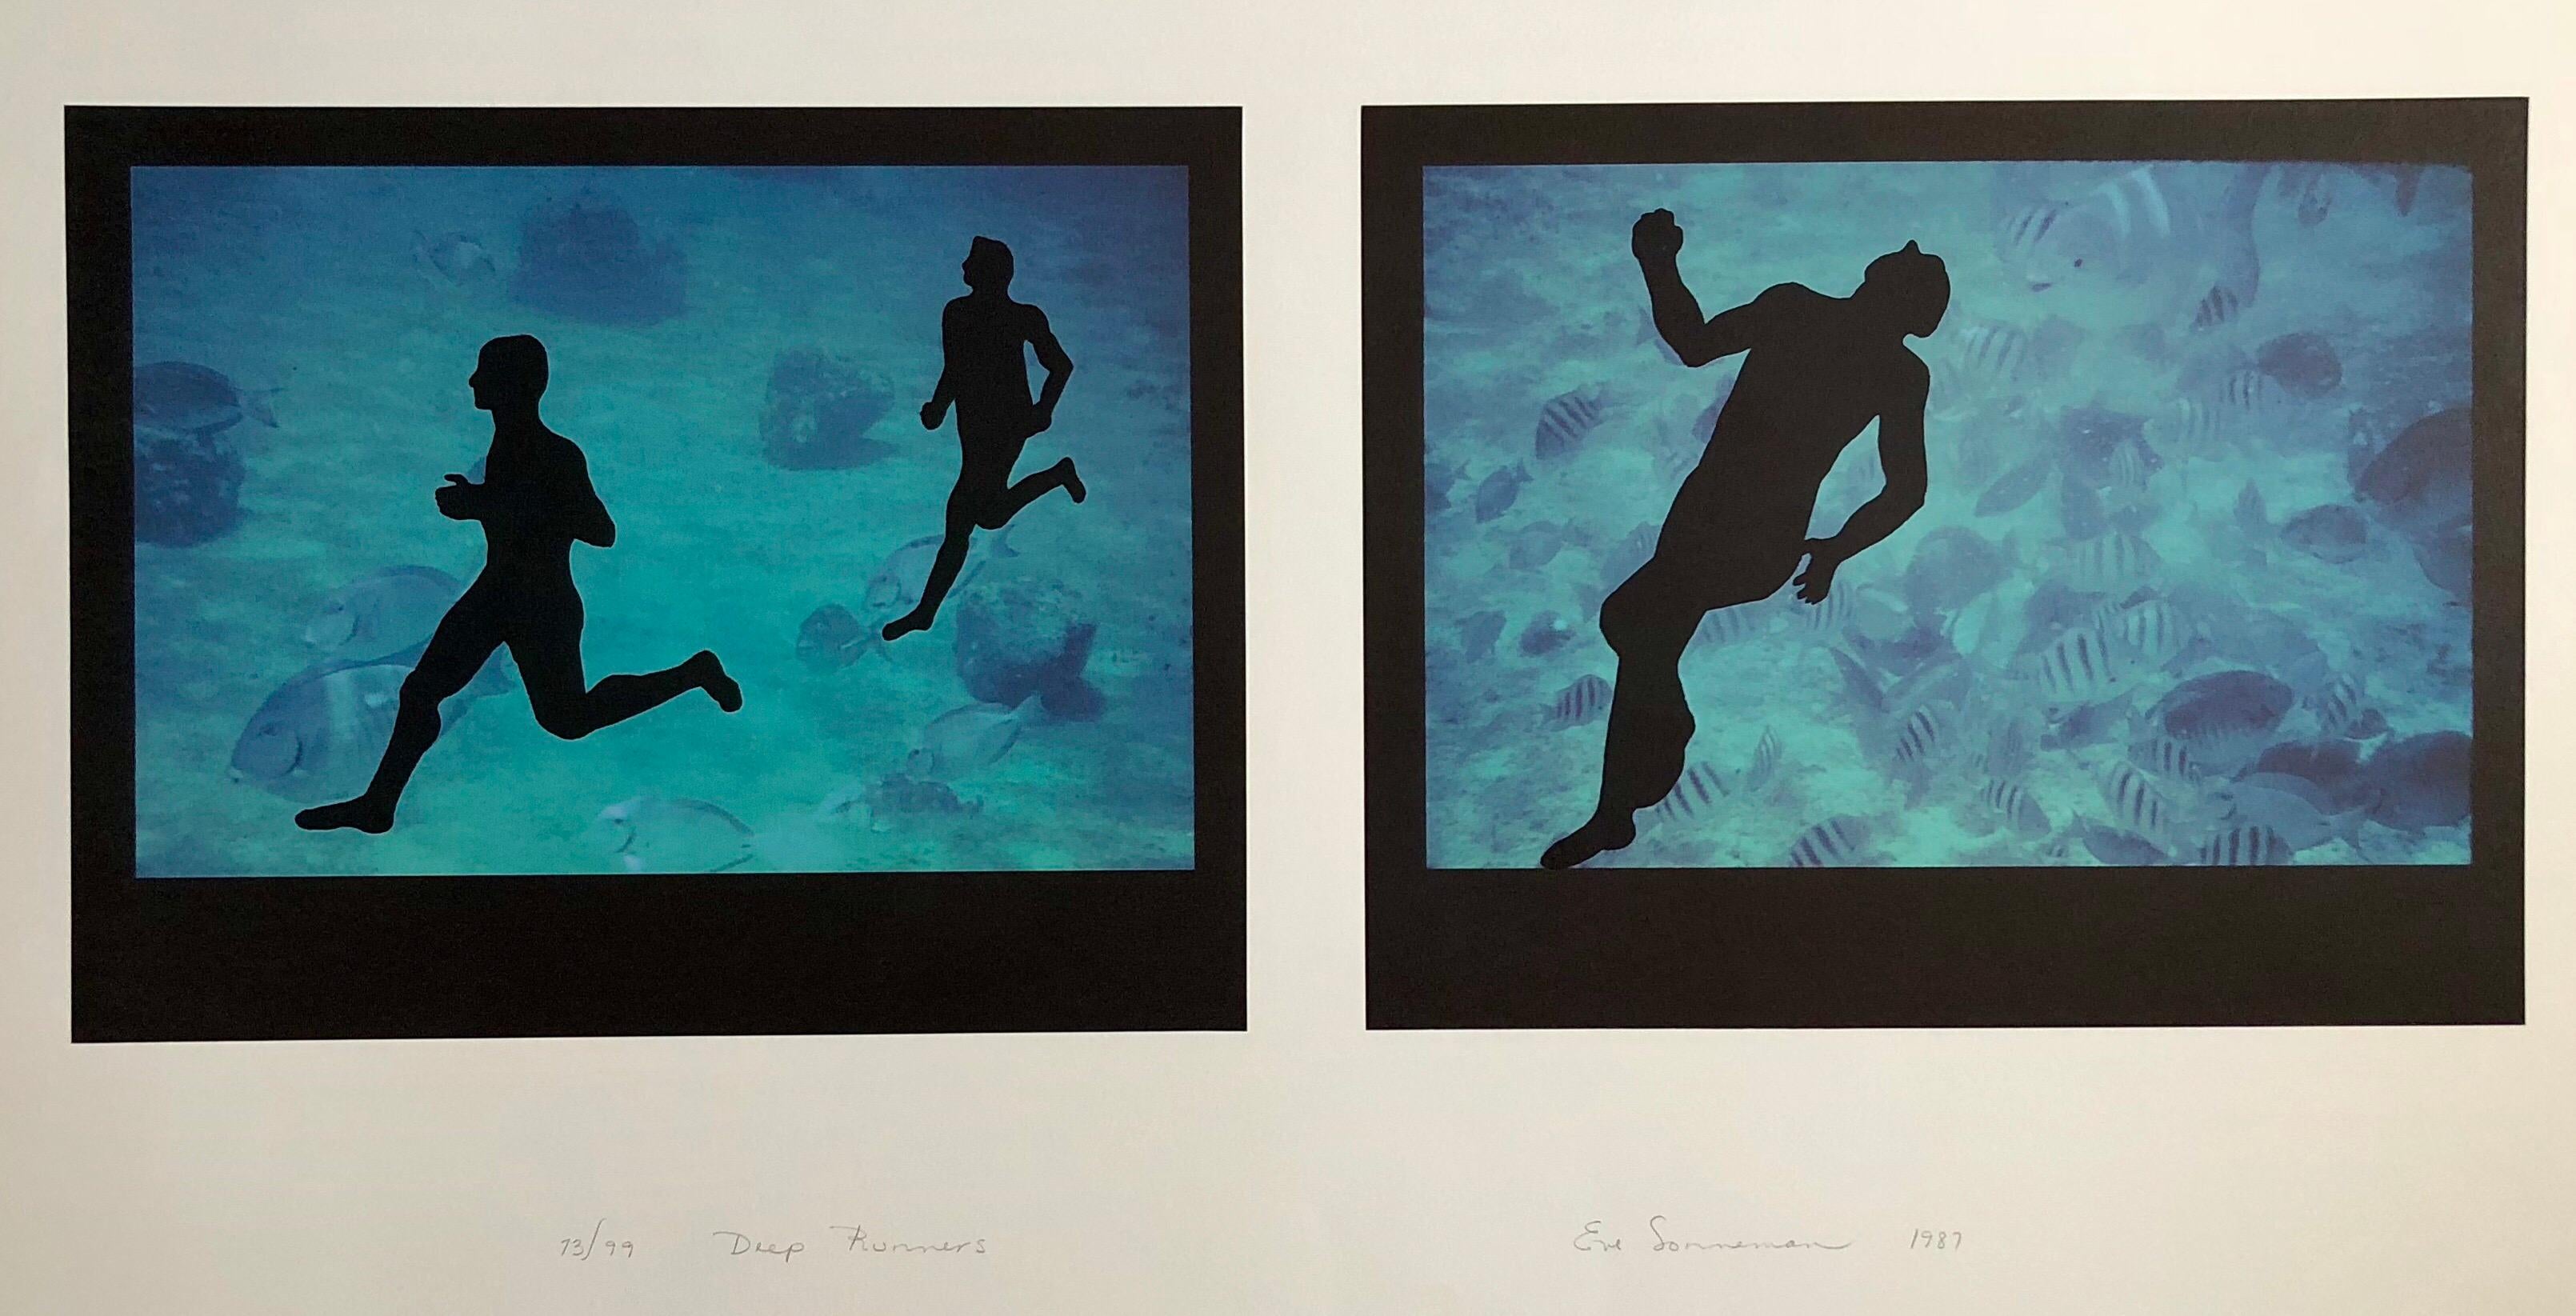 Eve Sonneman Color Photograph - Large Diptych "Deep runners" Photograph Signed Surrealist Photo Lithograph 